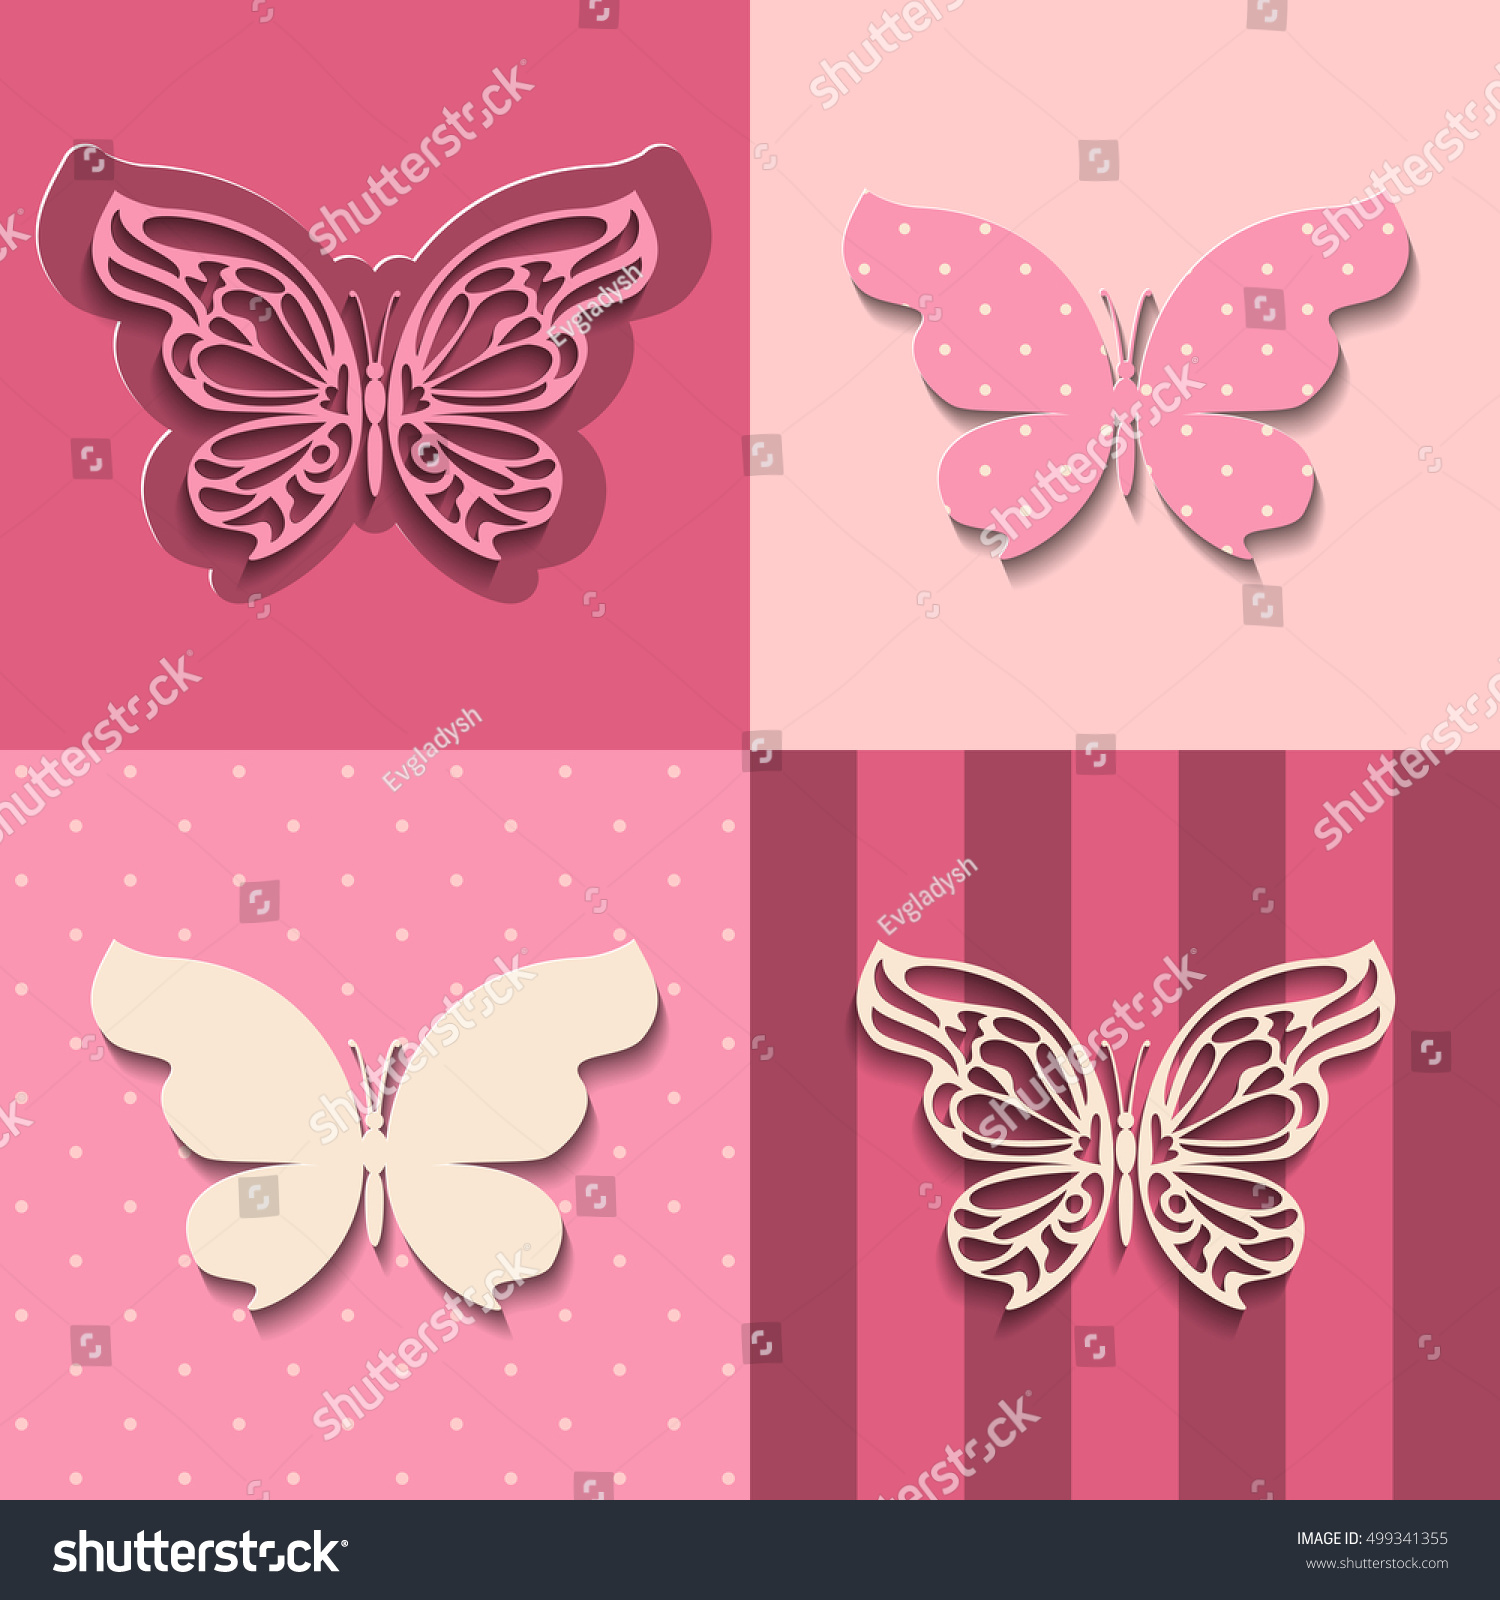 3D Butterfly Cut Out Template from image.shutterstock.com